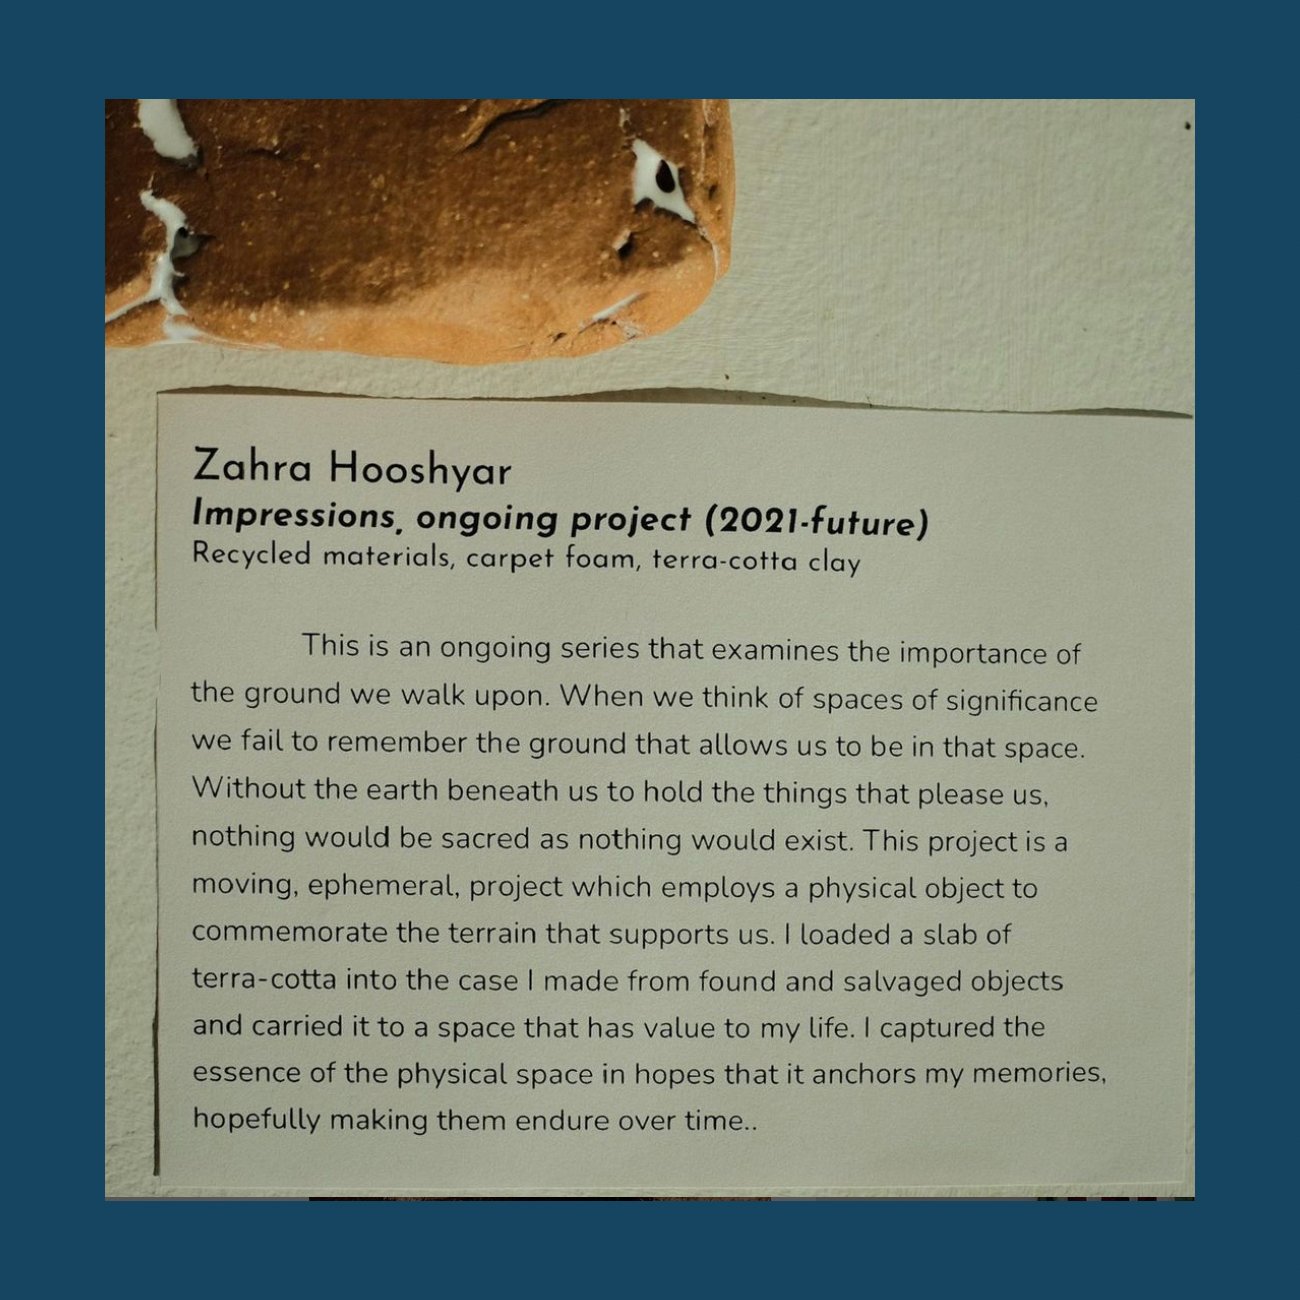 19_ep12_season1_Zahra_Hooshyar_the-artist-in-me-is-dead-podcast_impressions_bfashow-2022-text.jpeg